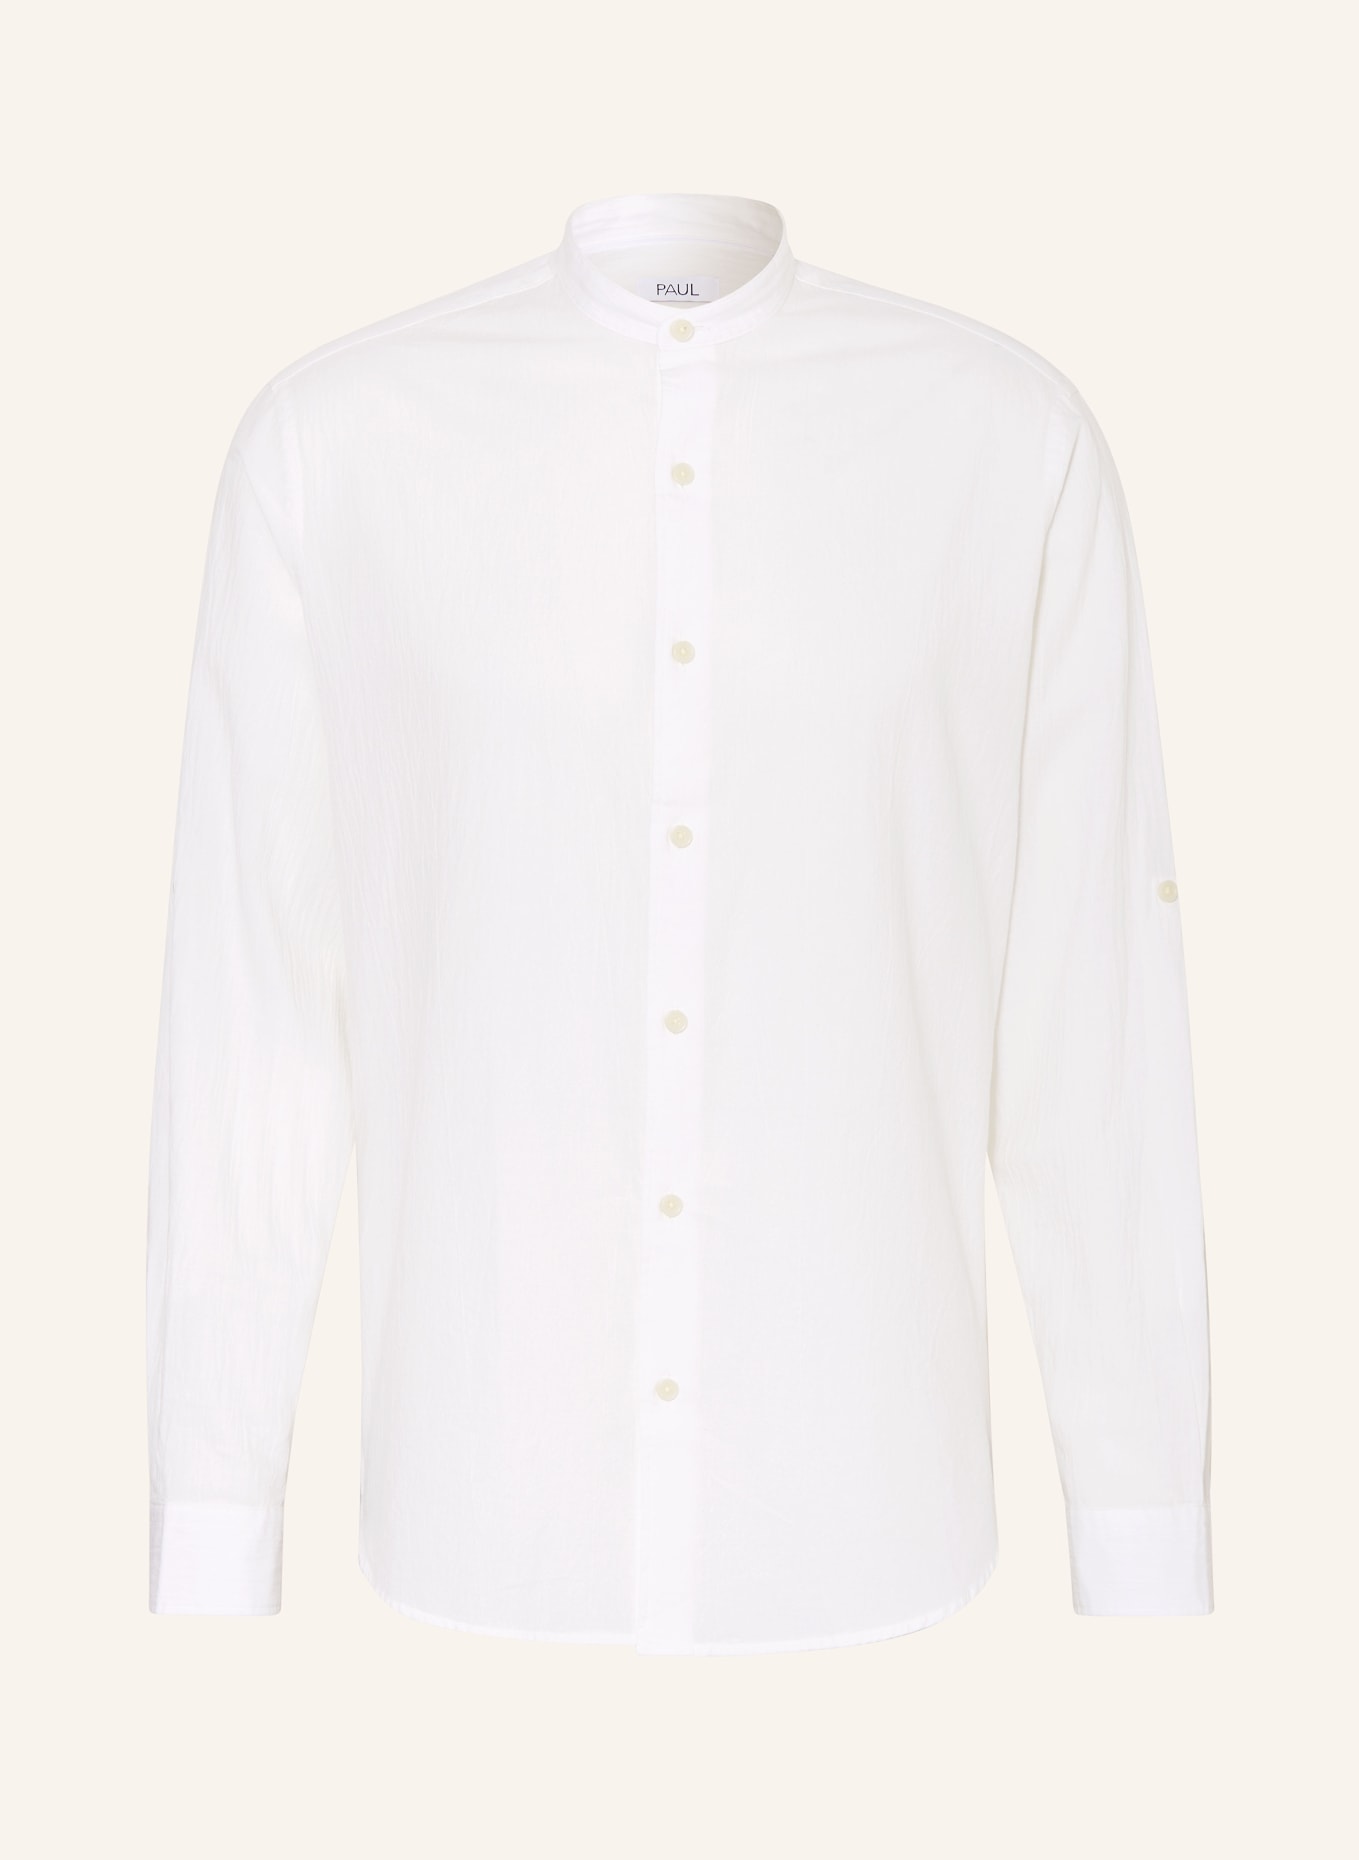 PAUL Shirt slim fit with stand-up collar, Color: WHITE (Image 1)